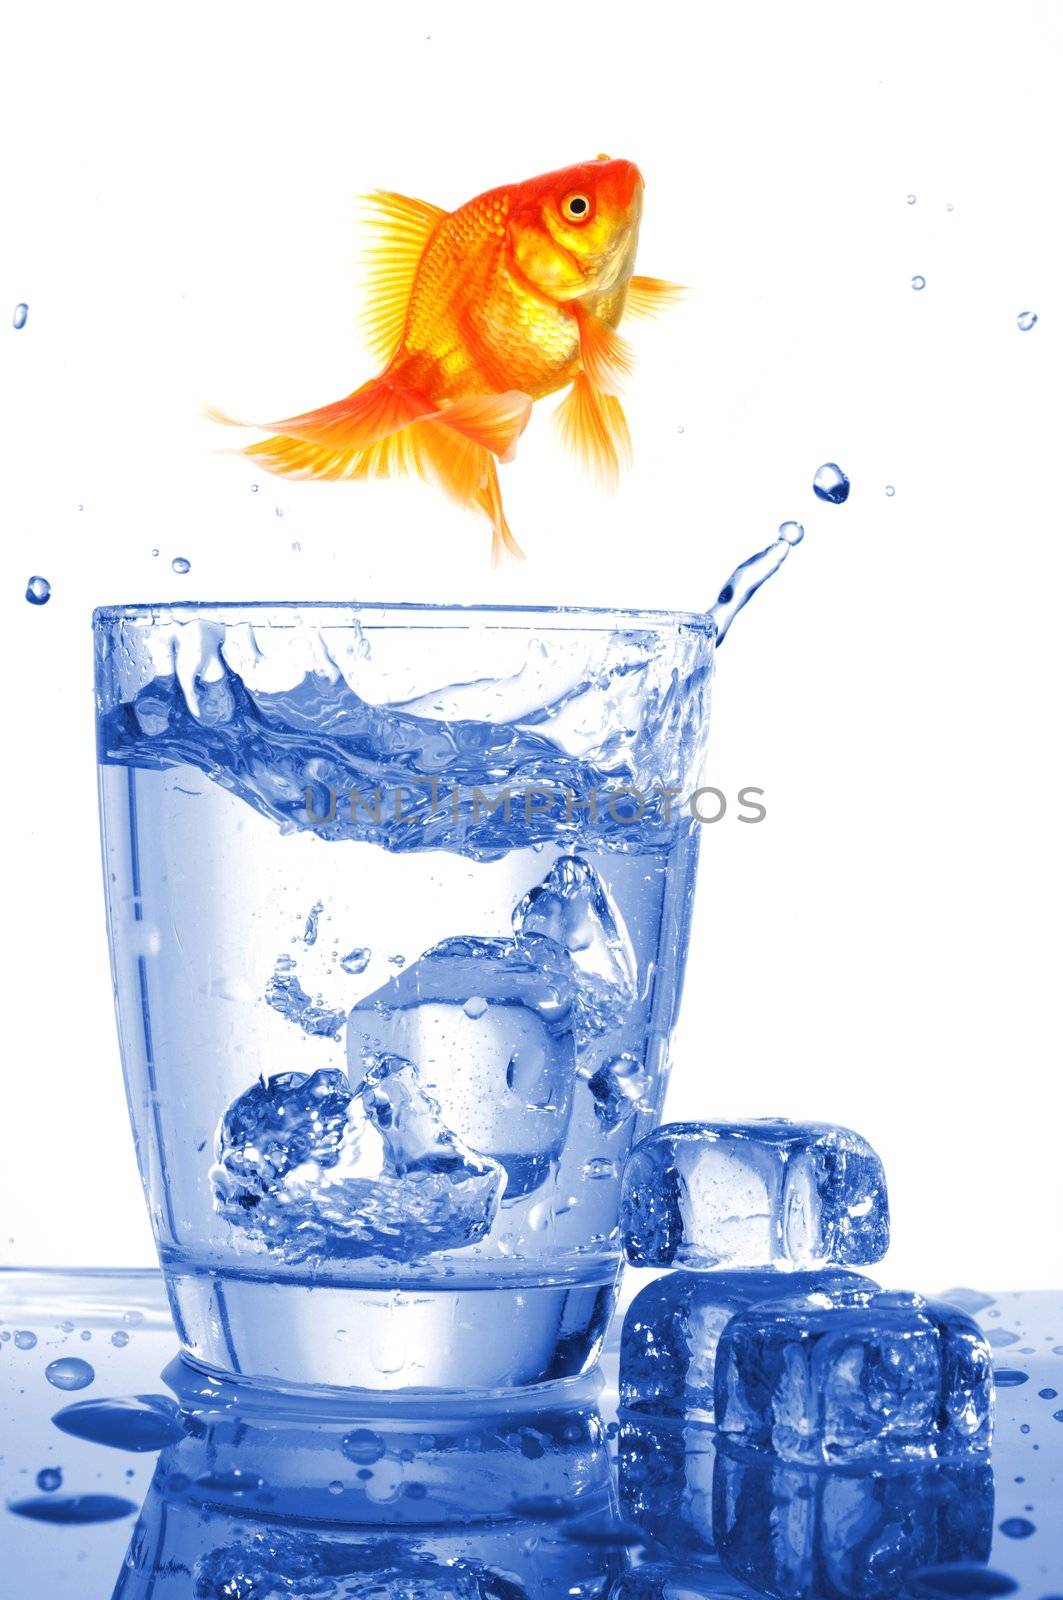 goldfish in glass water by gunnar3000